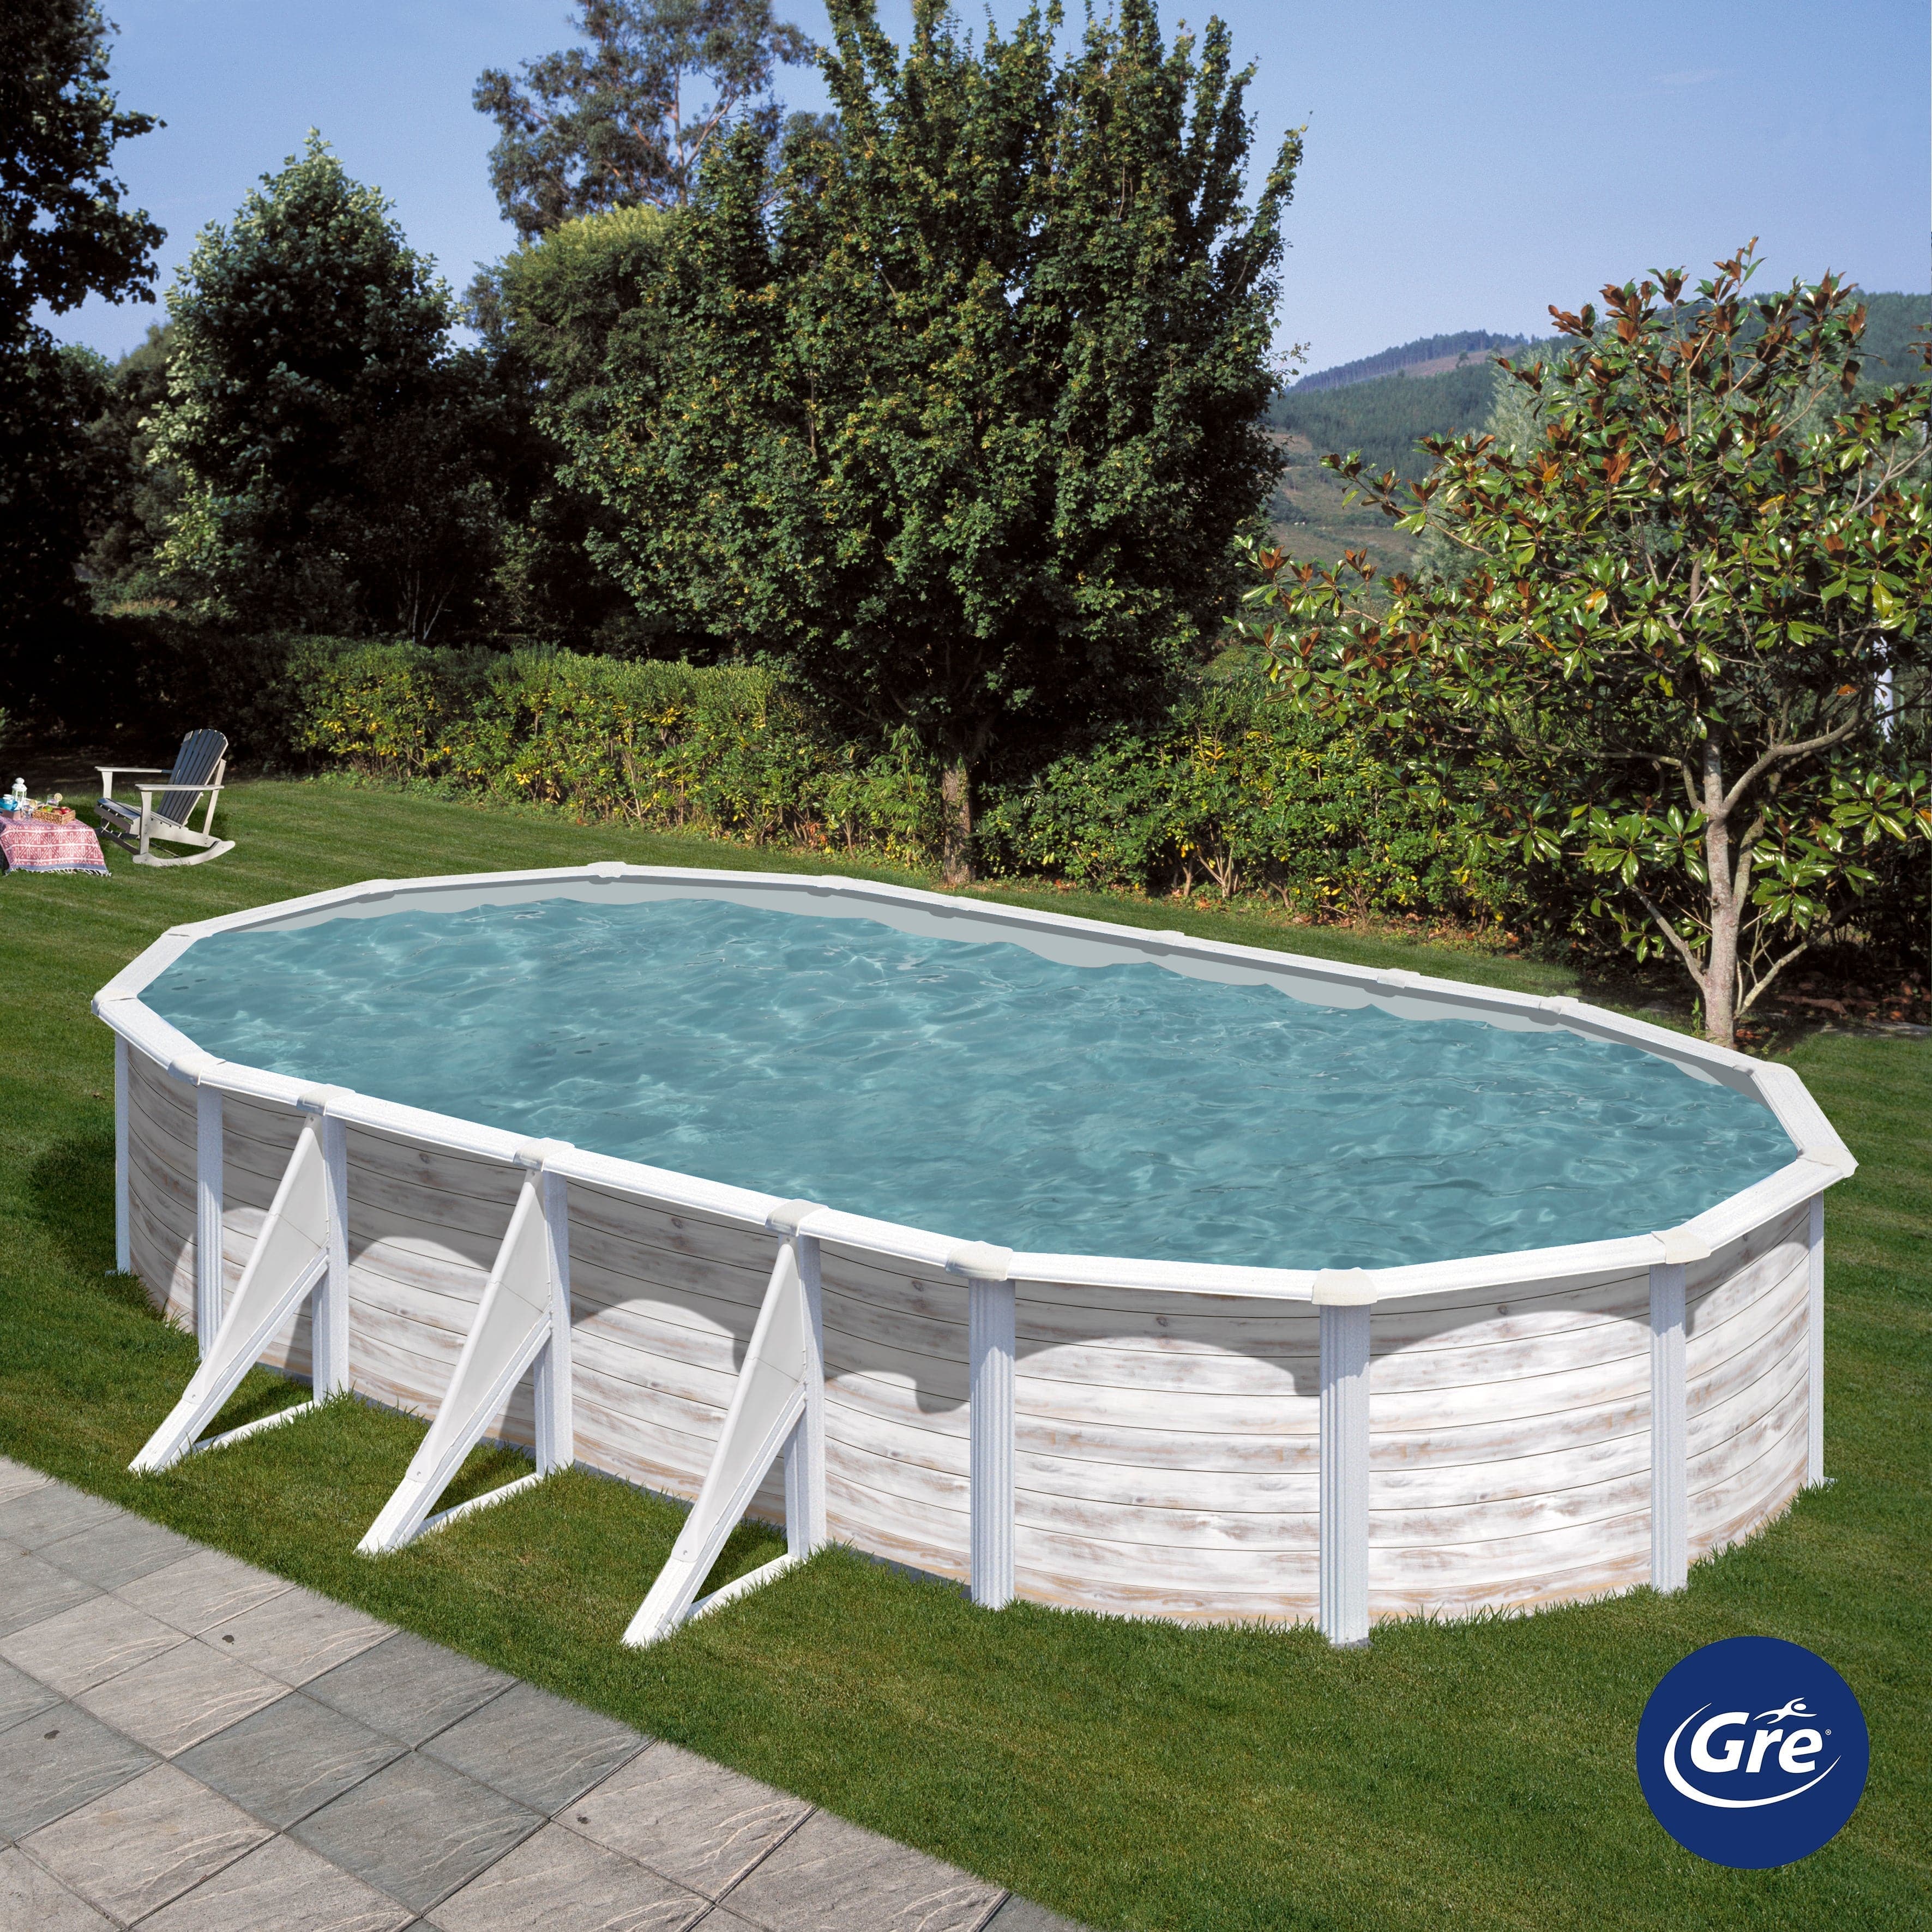 OVAL STEEL SWIMMING POOL NORDIC DECORATION 730X375 H 120 WITH SAND FILTER